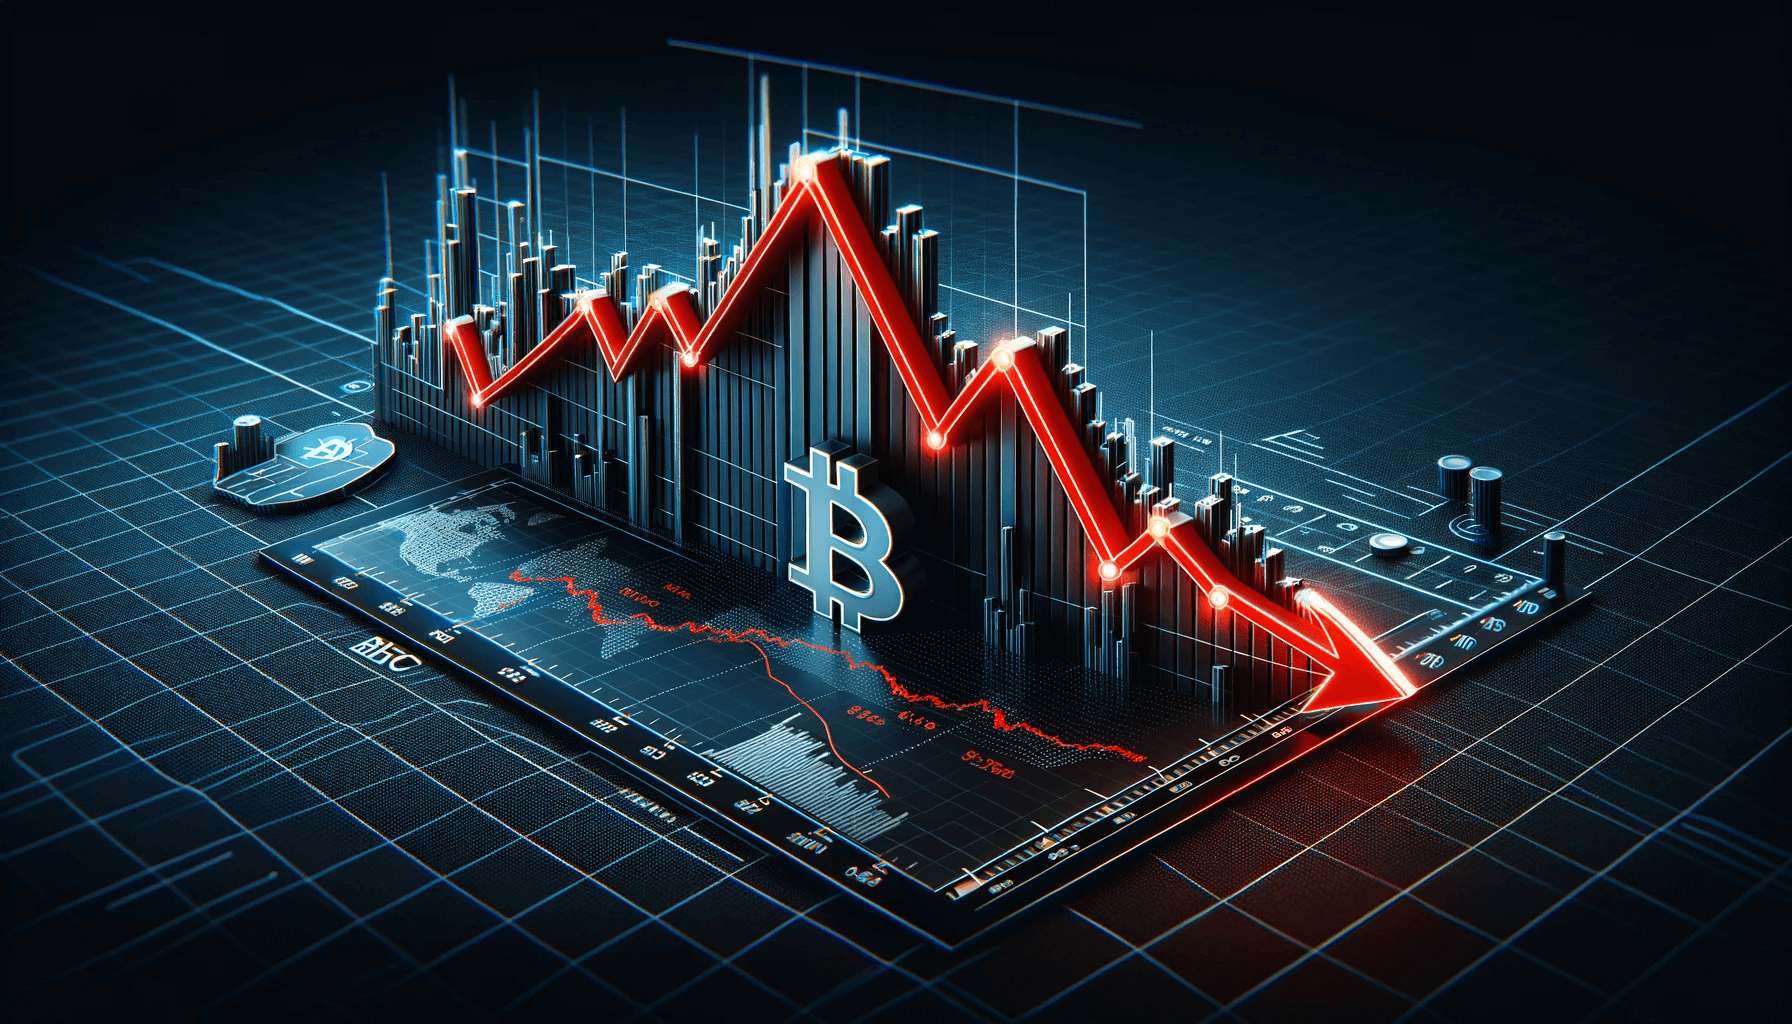 CryptoQuant Analysts Point to Risks of Bitcoin Price Correction